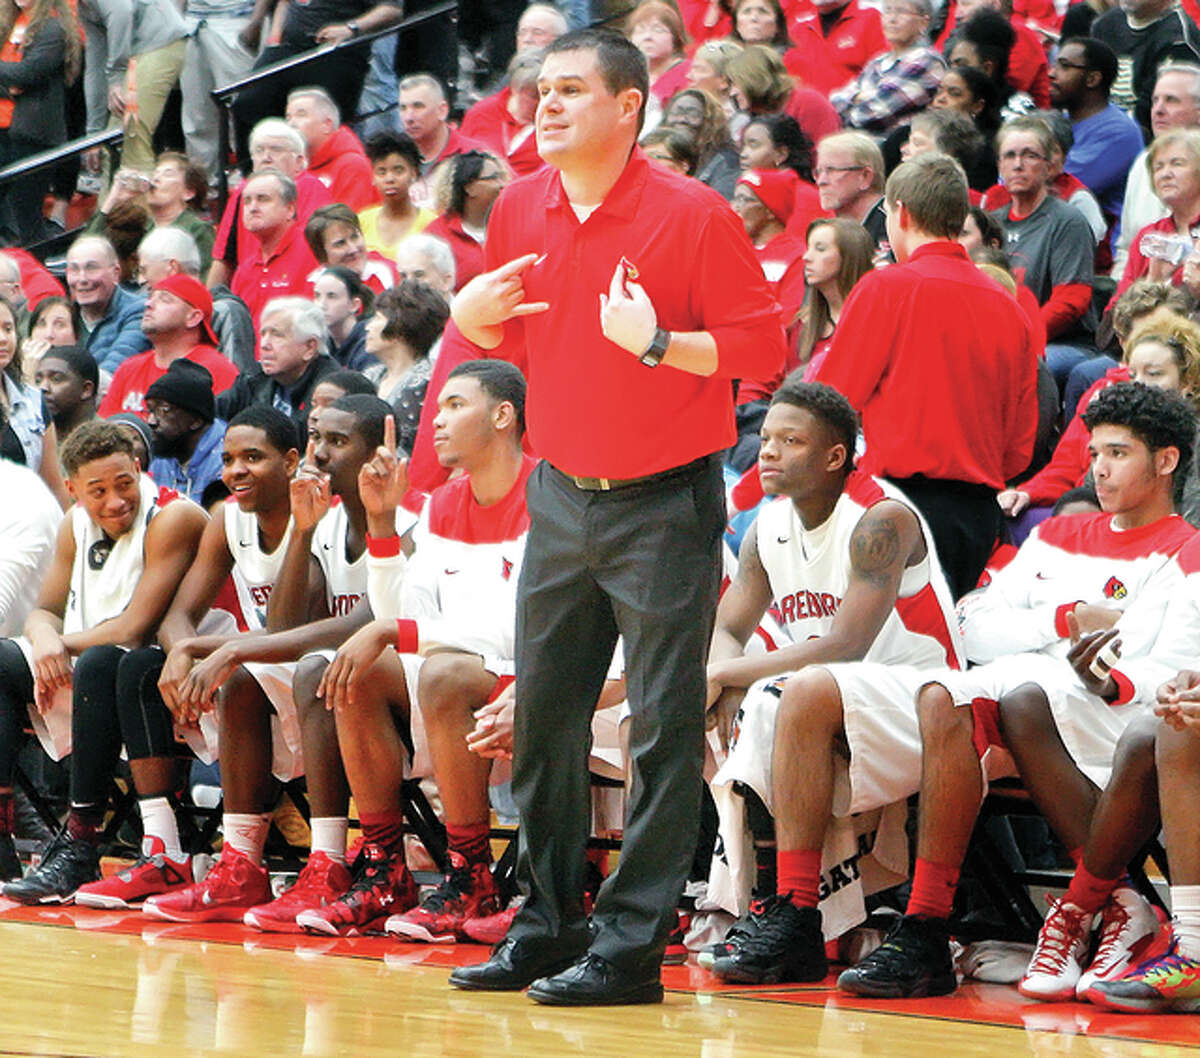 Alton coach Eric Smith’s Redbirds rolled up 50 points in the first half Tuesday night and cruised to a 73-58 victory over O’Fallon at AHS. The Redbirds are 4-1 on the season and 2-0 in the Southwestern Conference.